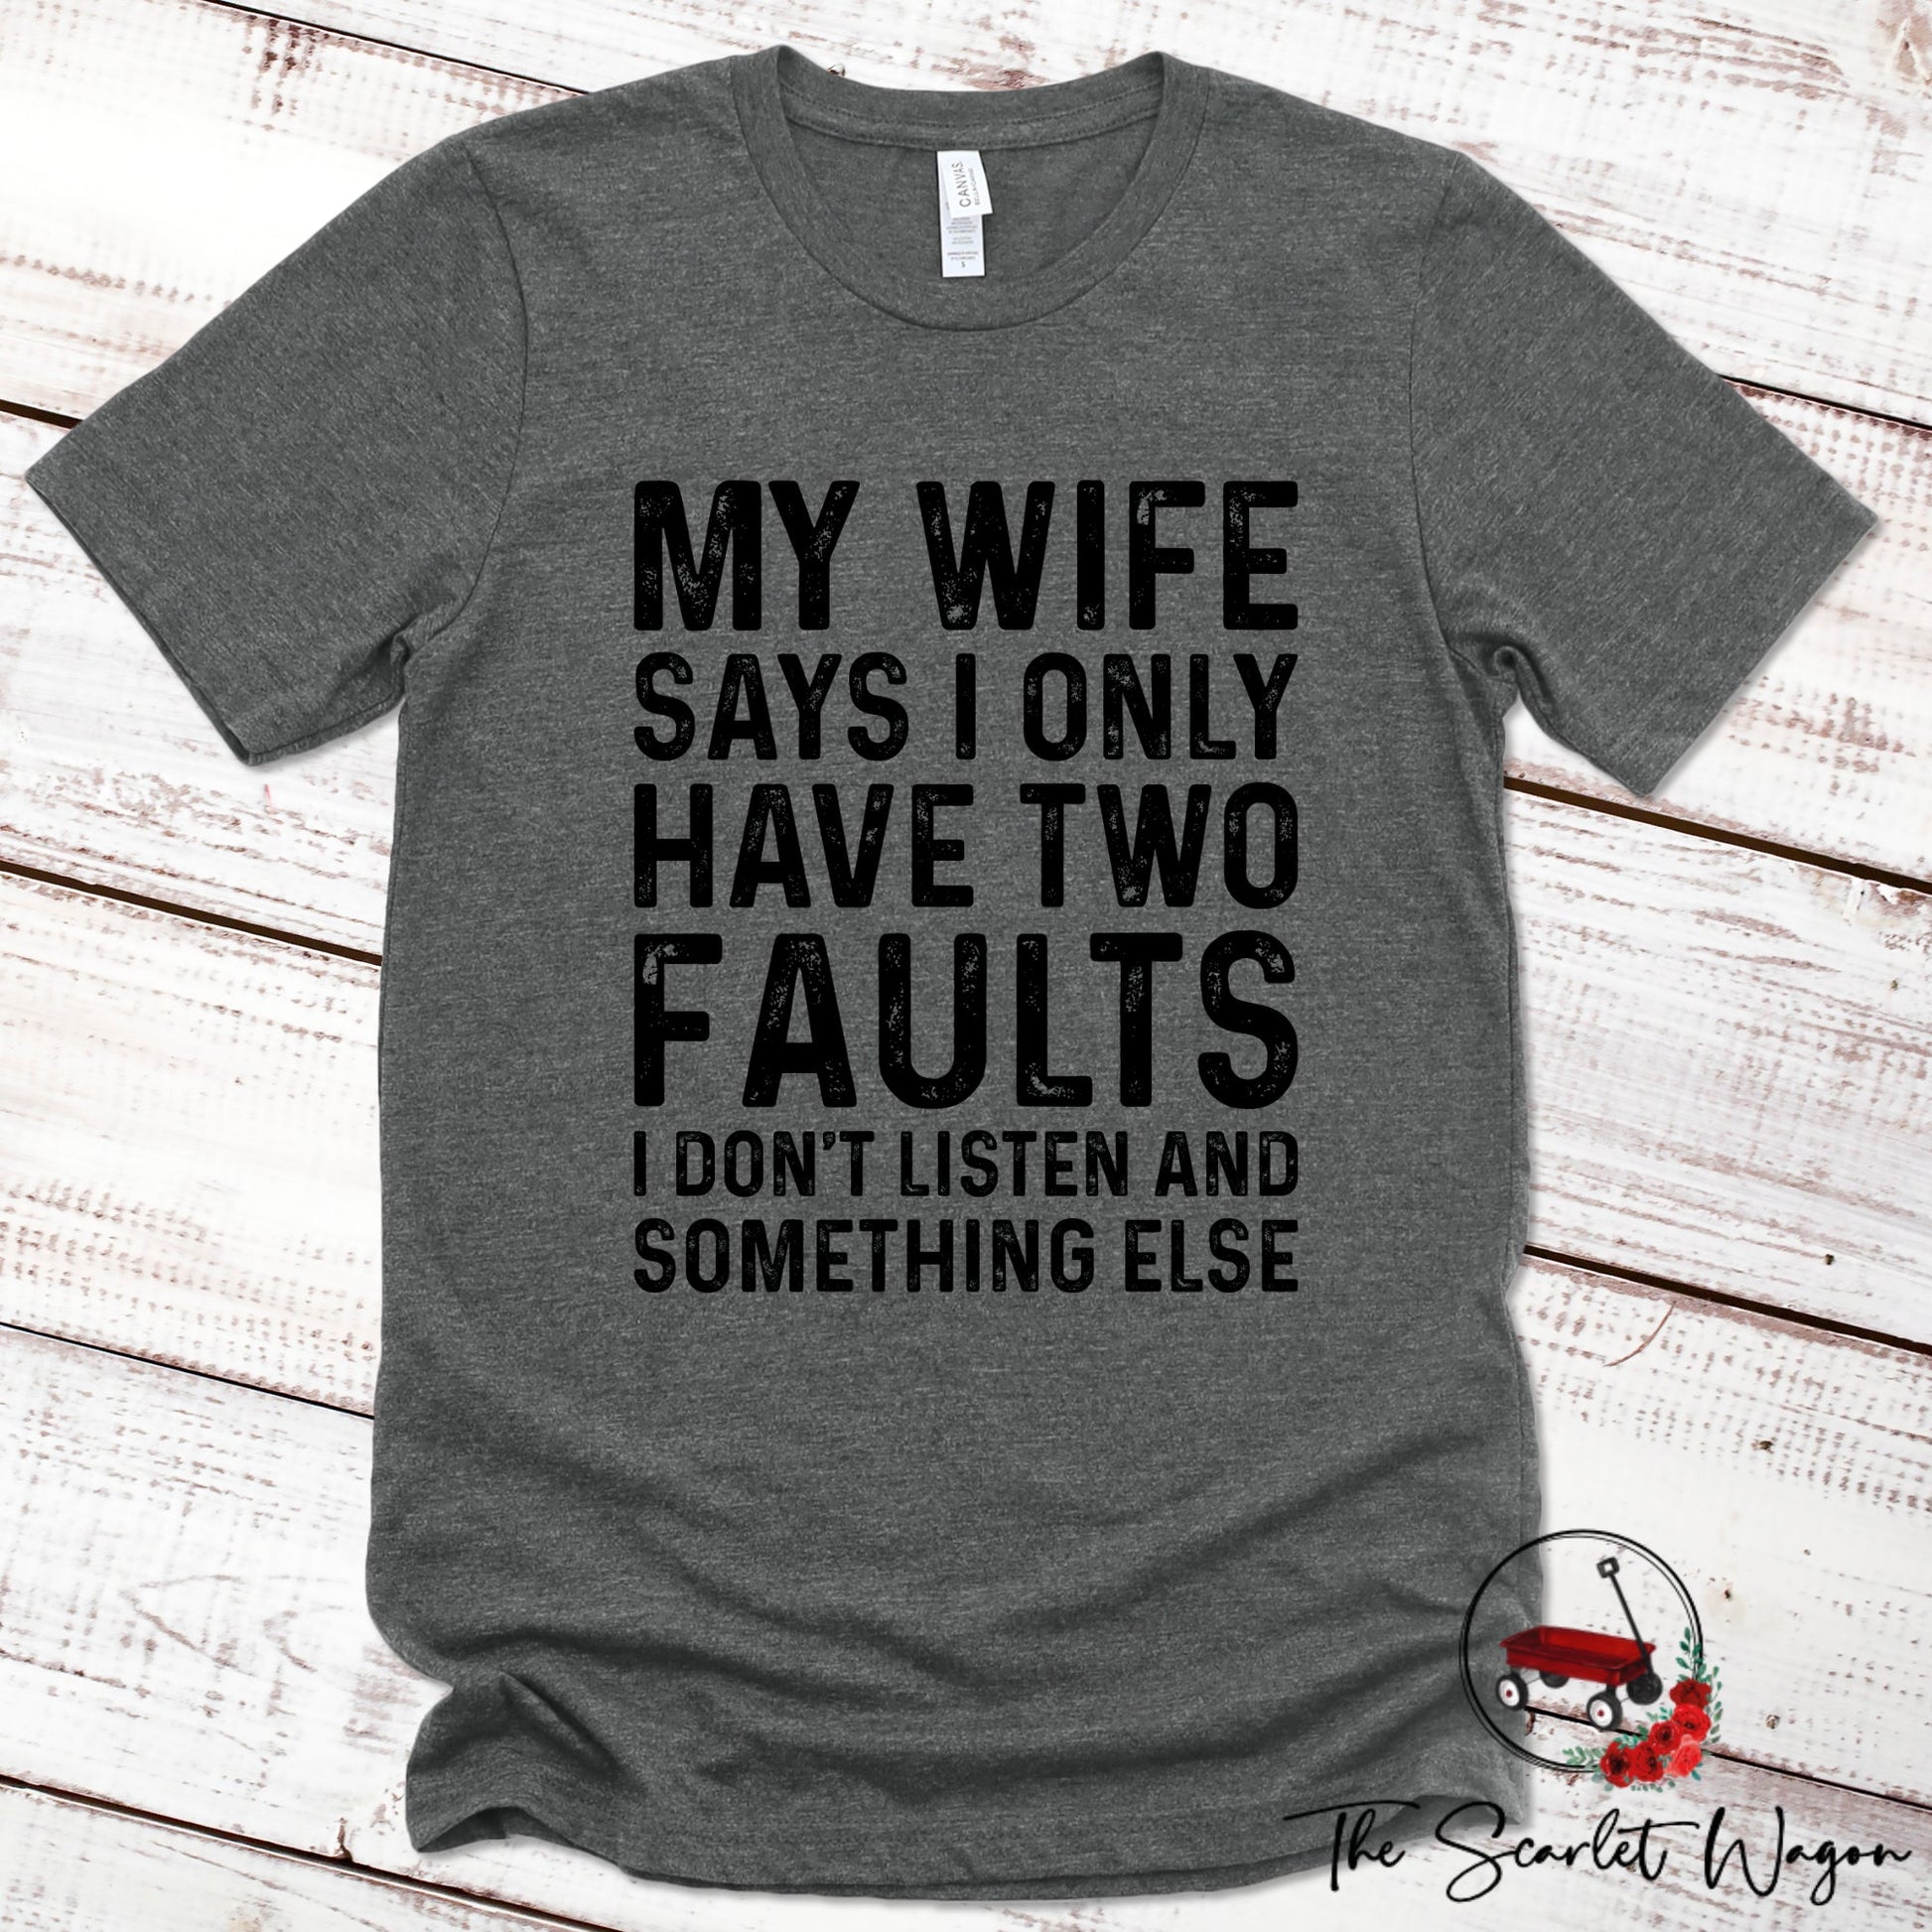 My Wife Says I Have Two Faults Premium Tee Scarlet Wagon Deep Heather Gray XS 